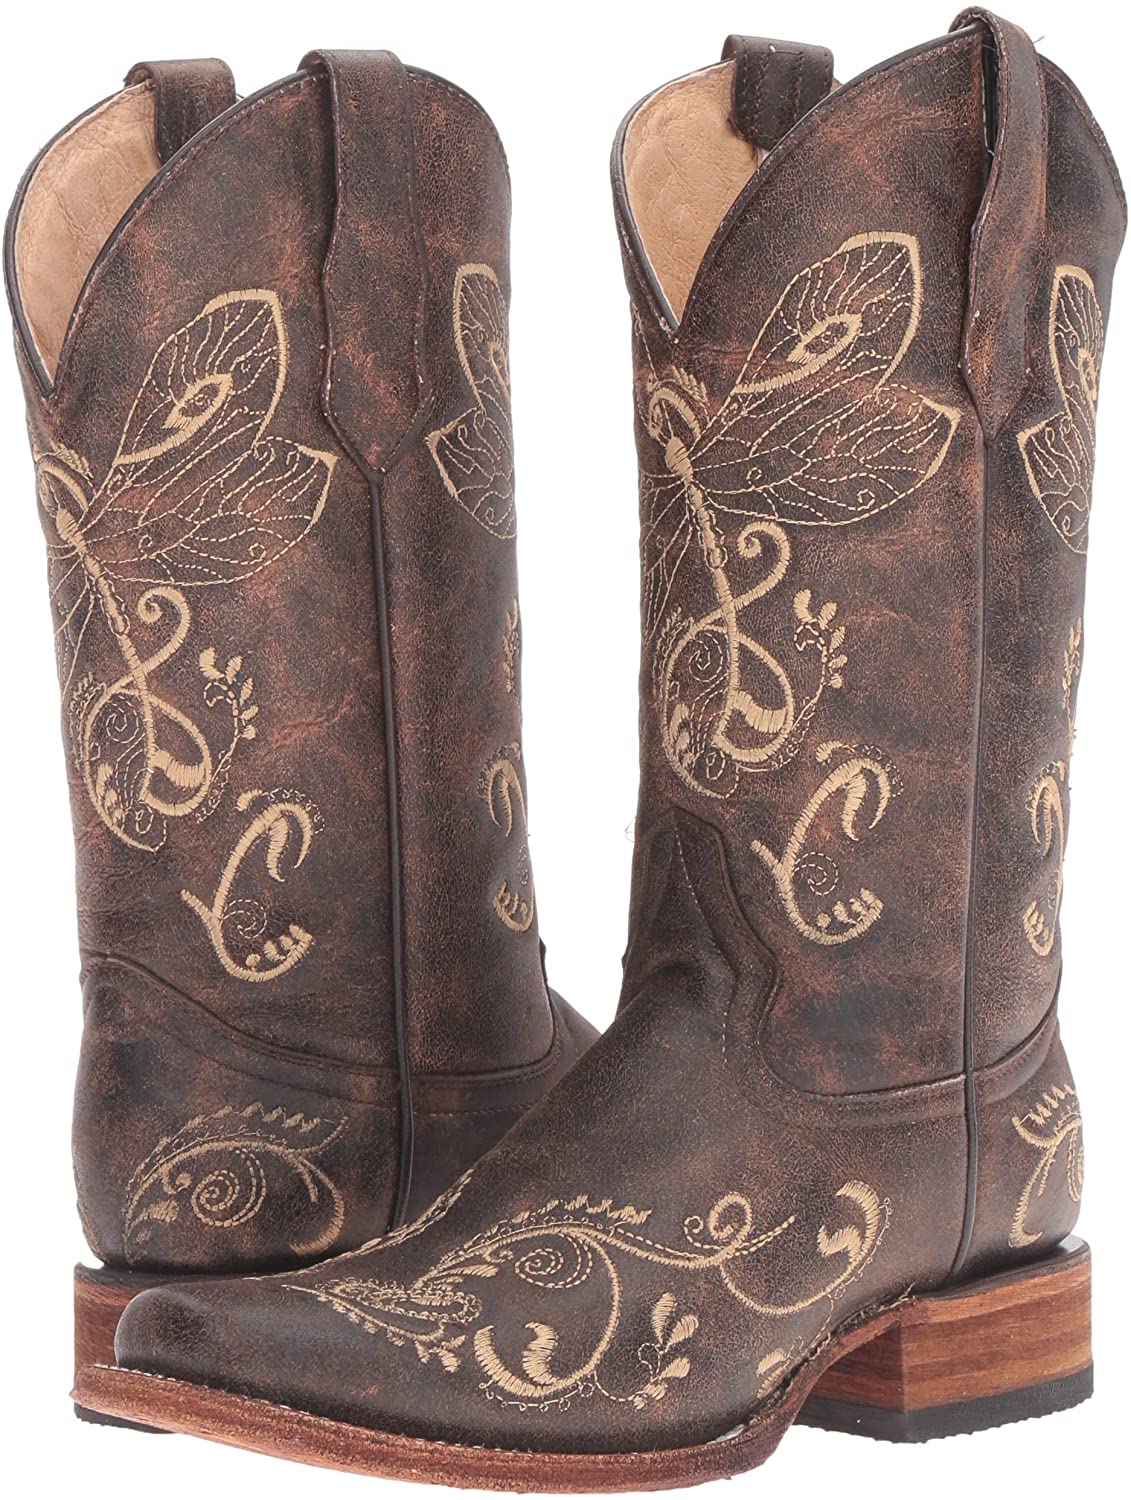 L5079 - Circle G brown roper western leather boots with embroidery for women-Kuet.us